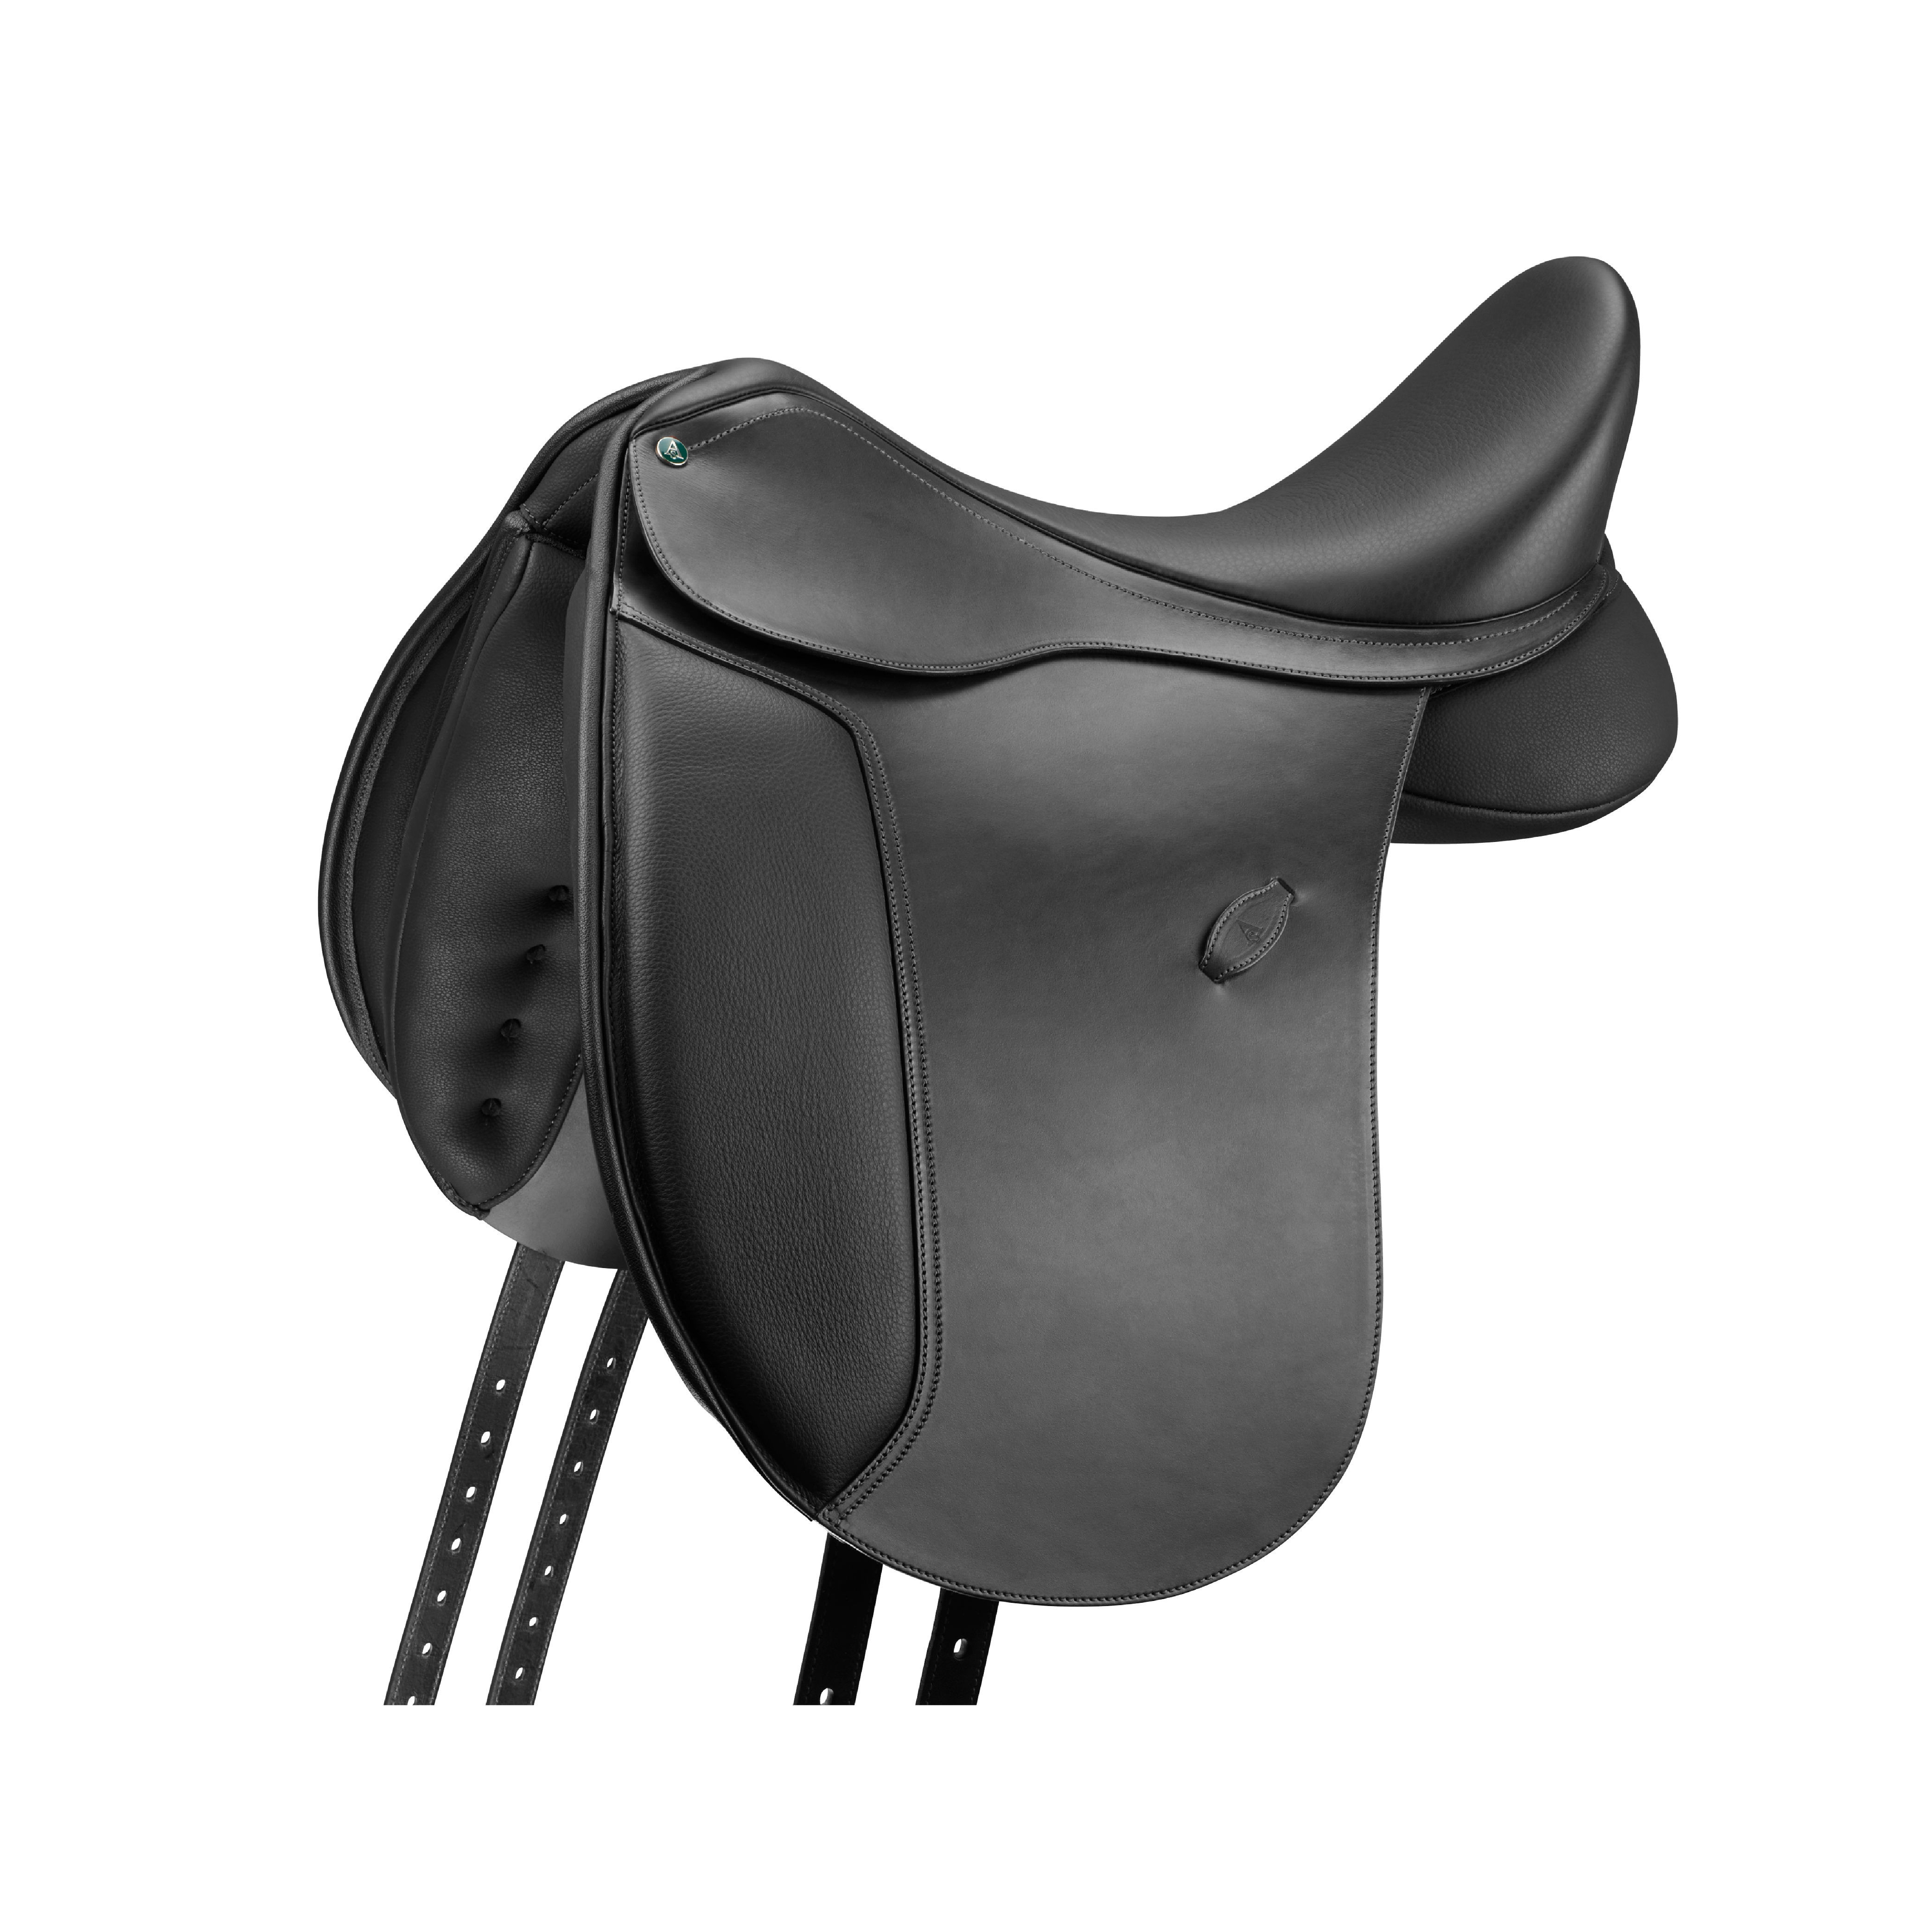 Arena High Wither Dressage saddle - 451:31697553555505,31697553588273,31697553653809,41703056212151